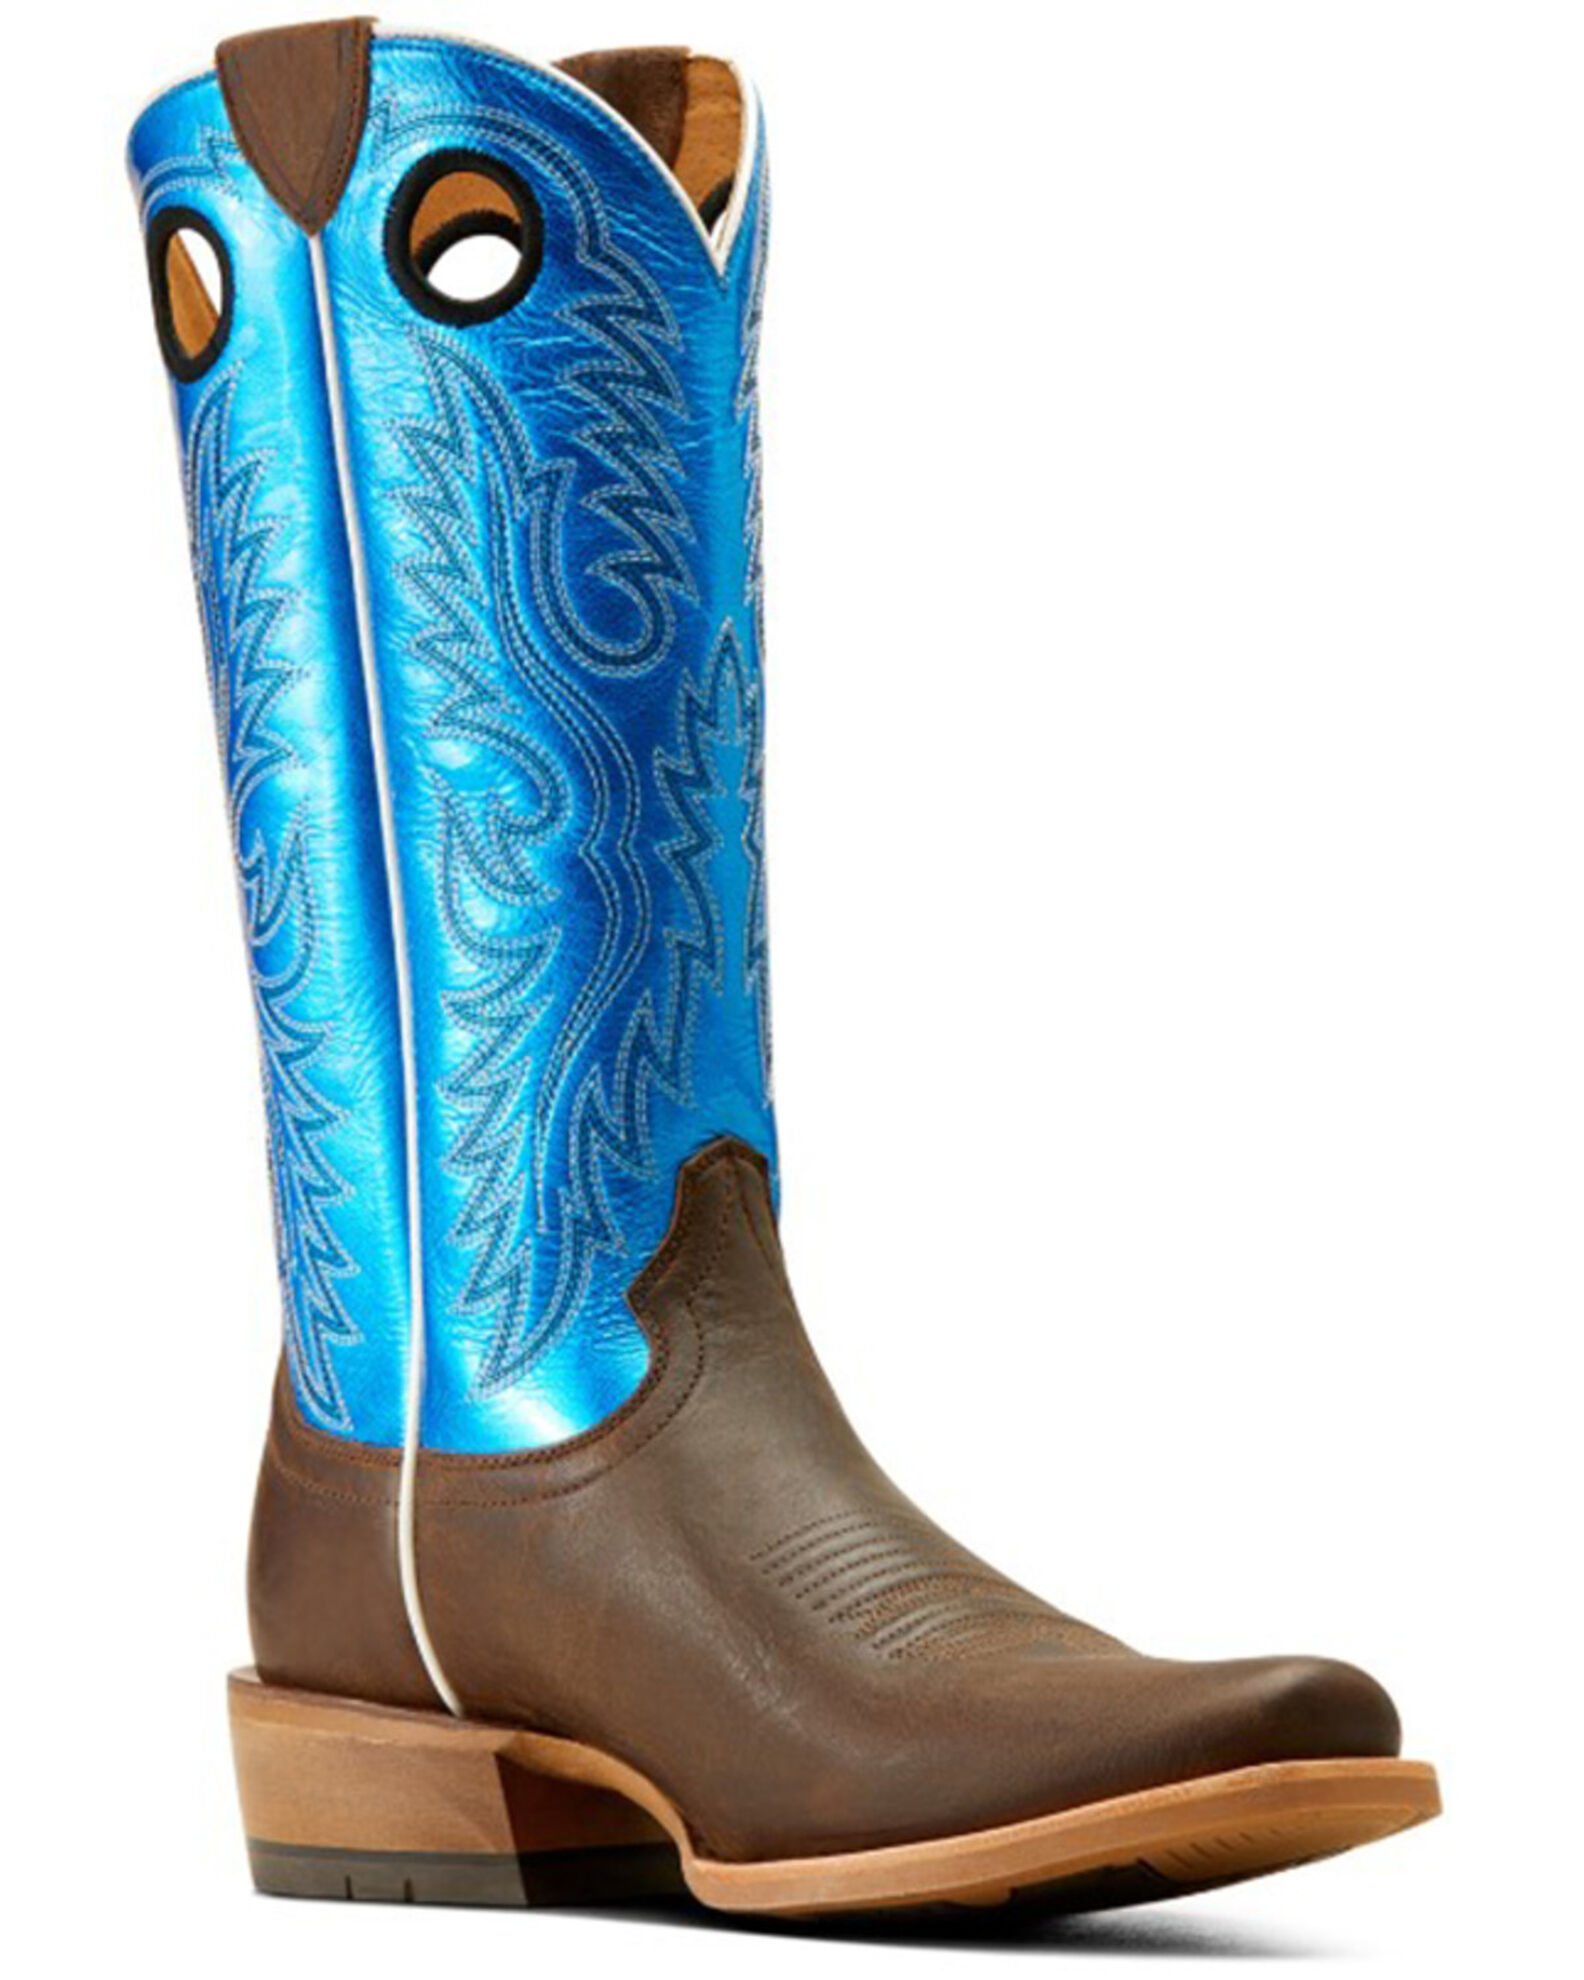 Product Name: Ariat Men's Ringer Tall Western Boots - Square Toe